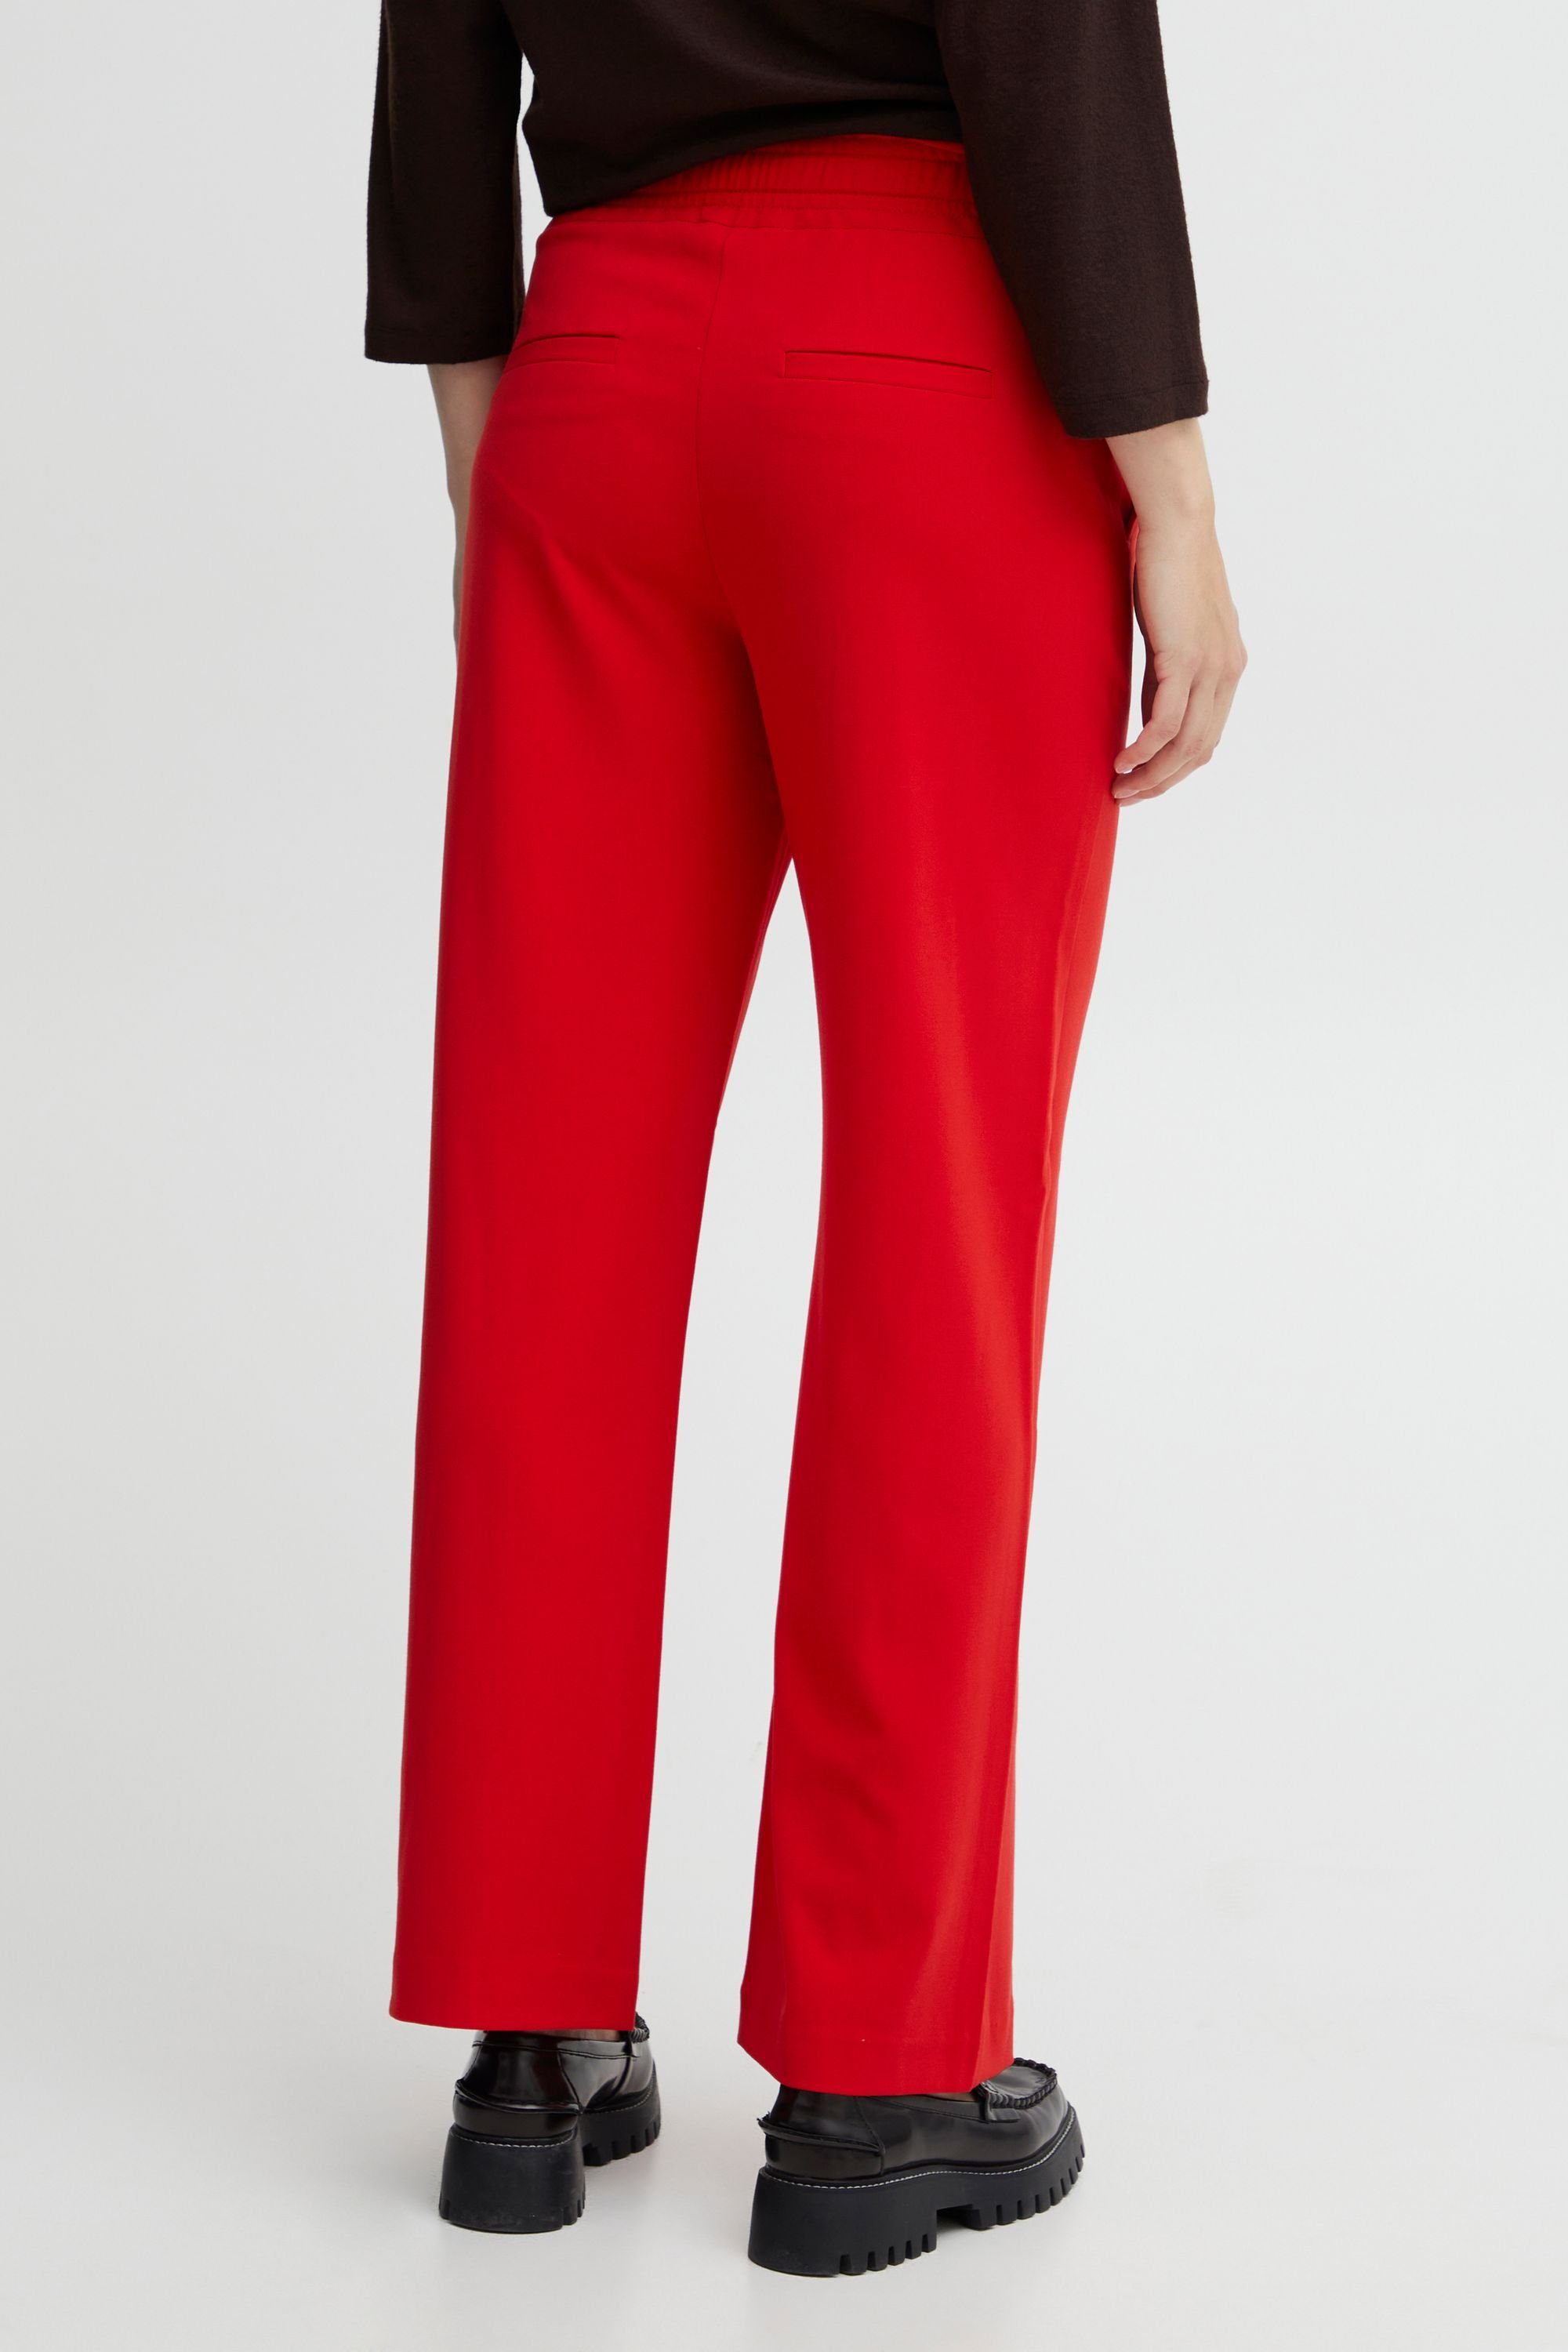 (181663) BYDANTA Jogger 20813077 Y - CASUAL Red Chinese PANT Pants b.young